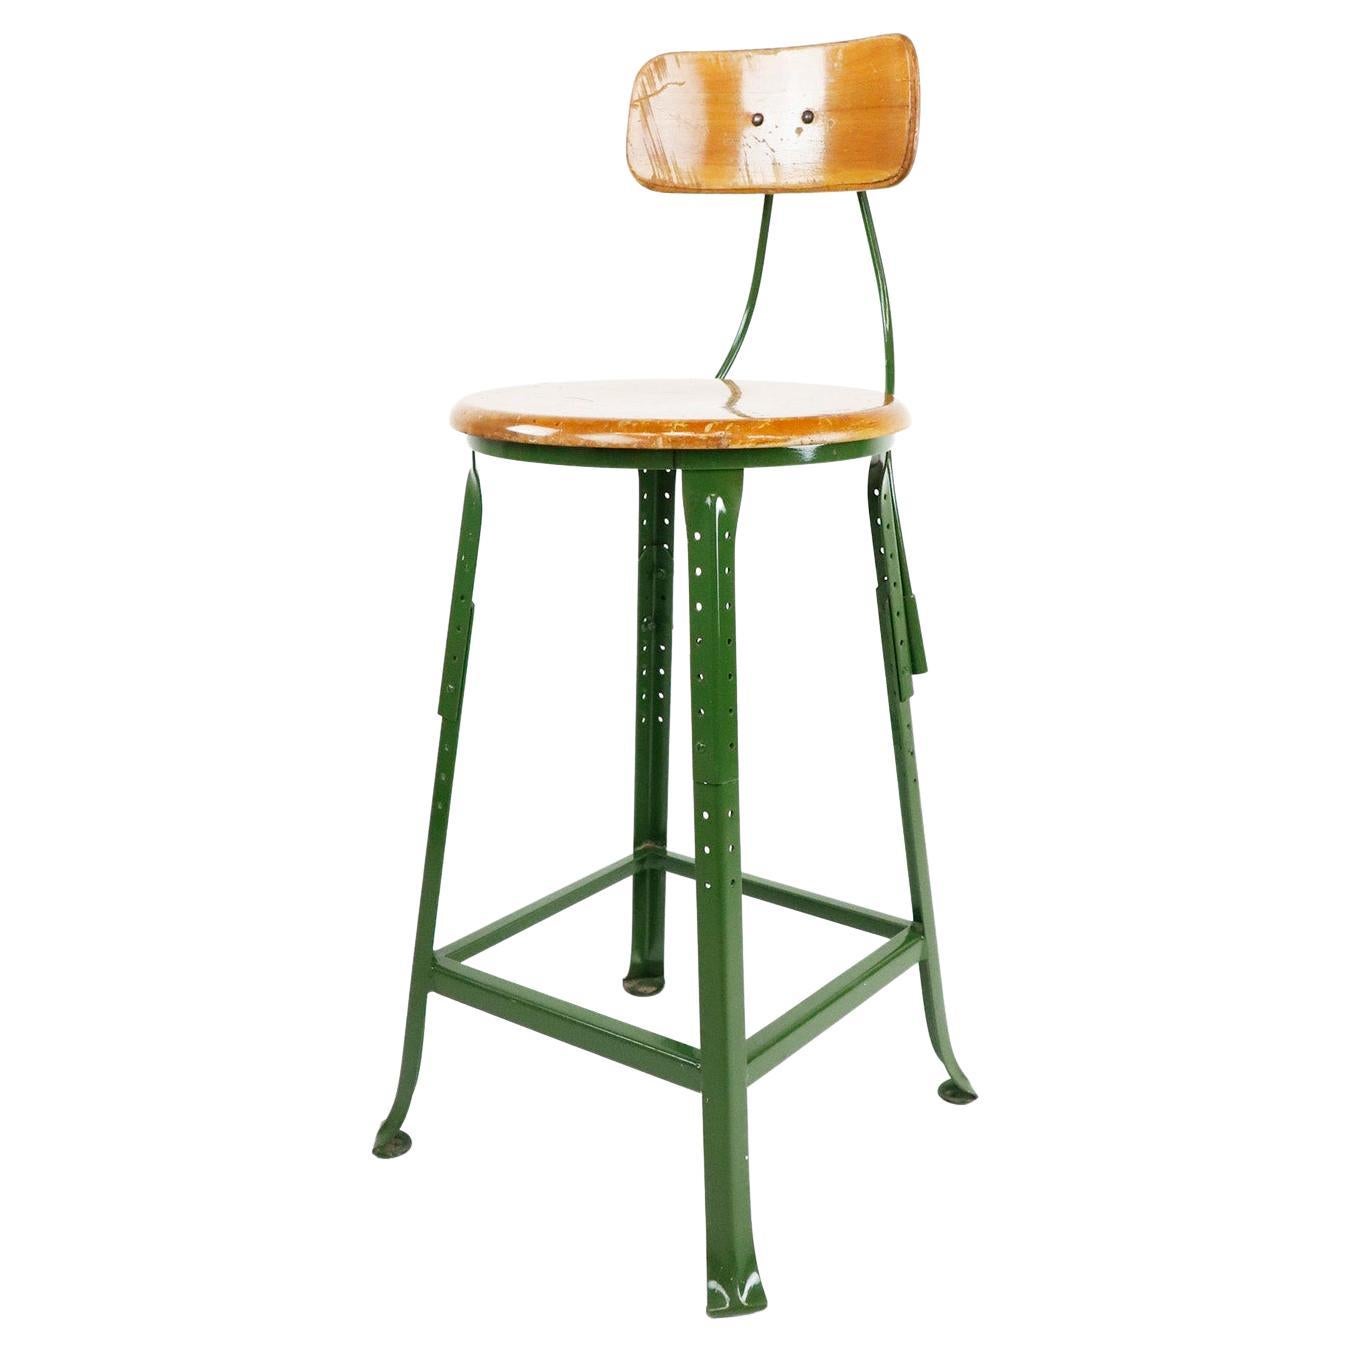 Authentic Vintage Industrial Factory Stool For Sale